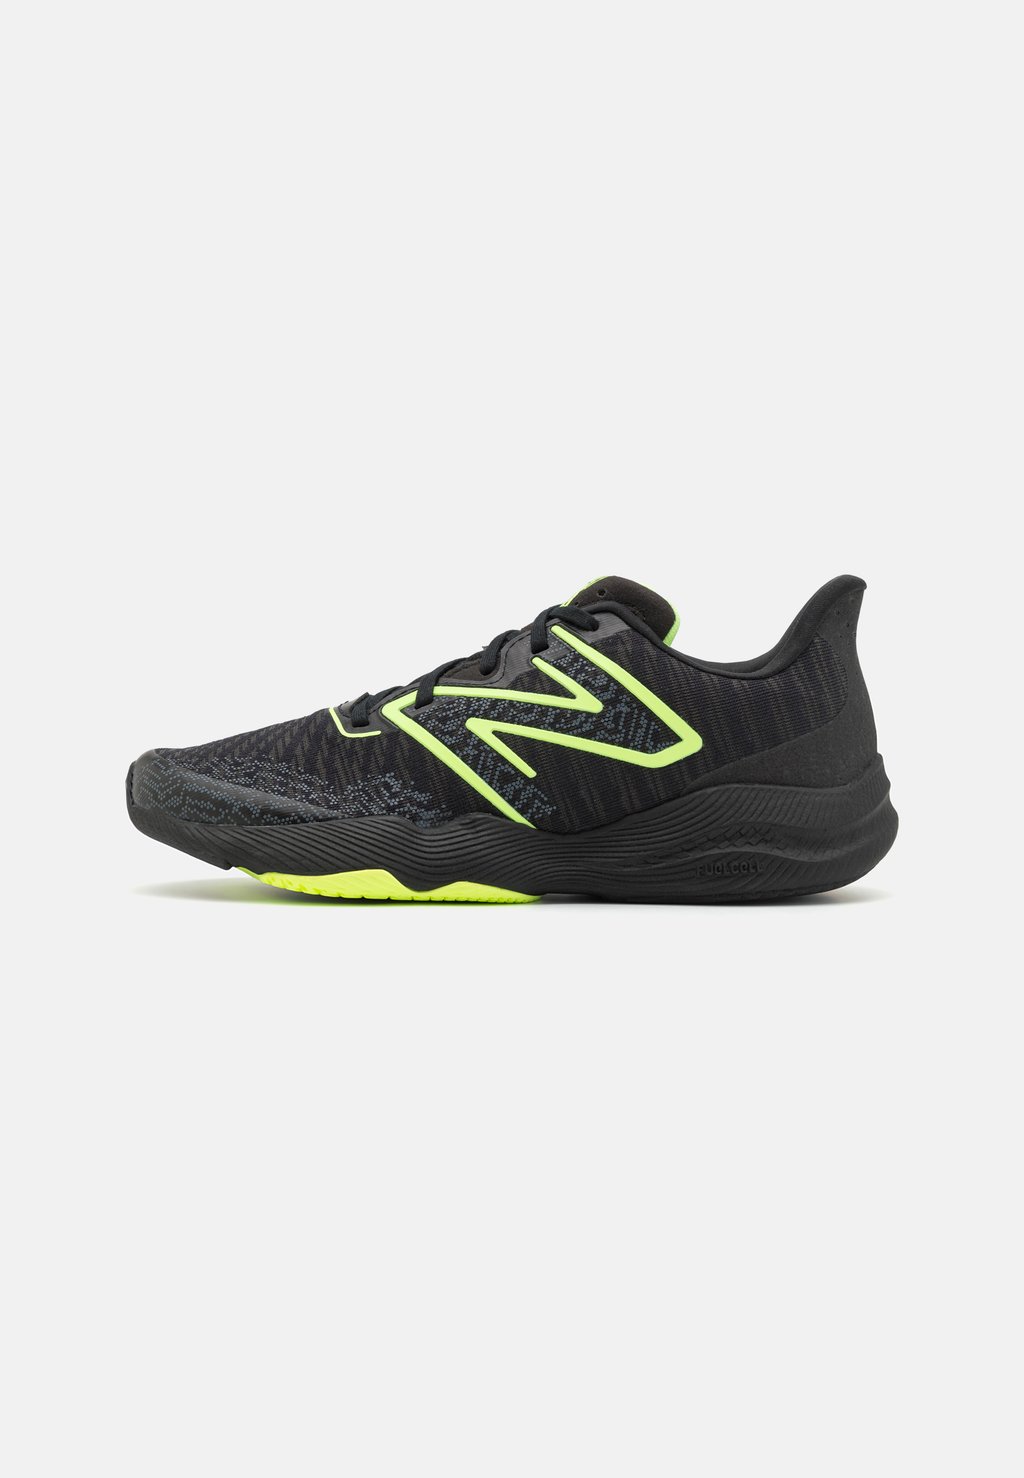 Кроссовки Fuelcell Shift Tr V2 New Balance, черный кроссовки fuelcell shift tr v2 new balance титан